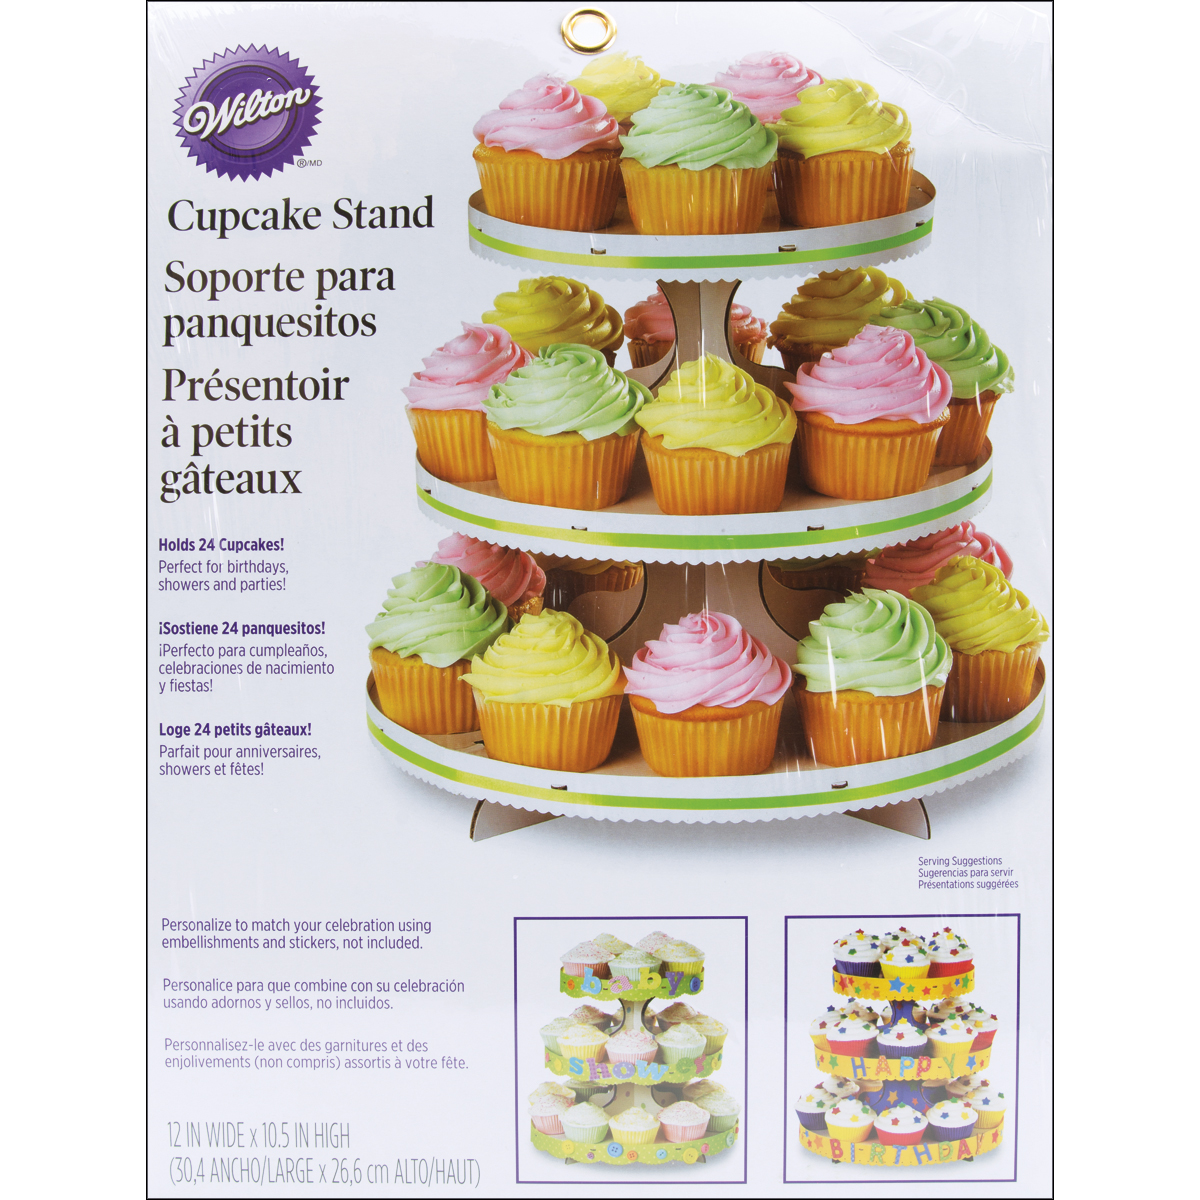 W1512127 Cupcake Stand-white 12 X 10.5 In. Holds 24 Cupcakes